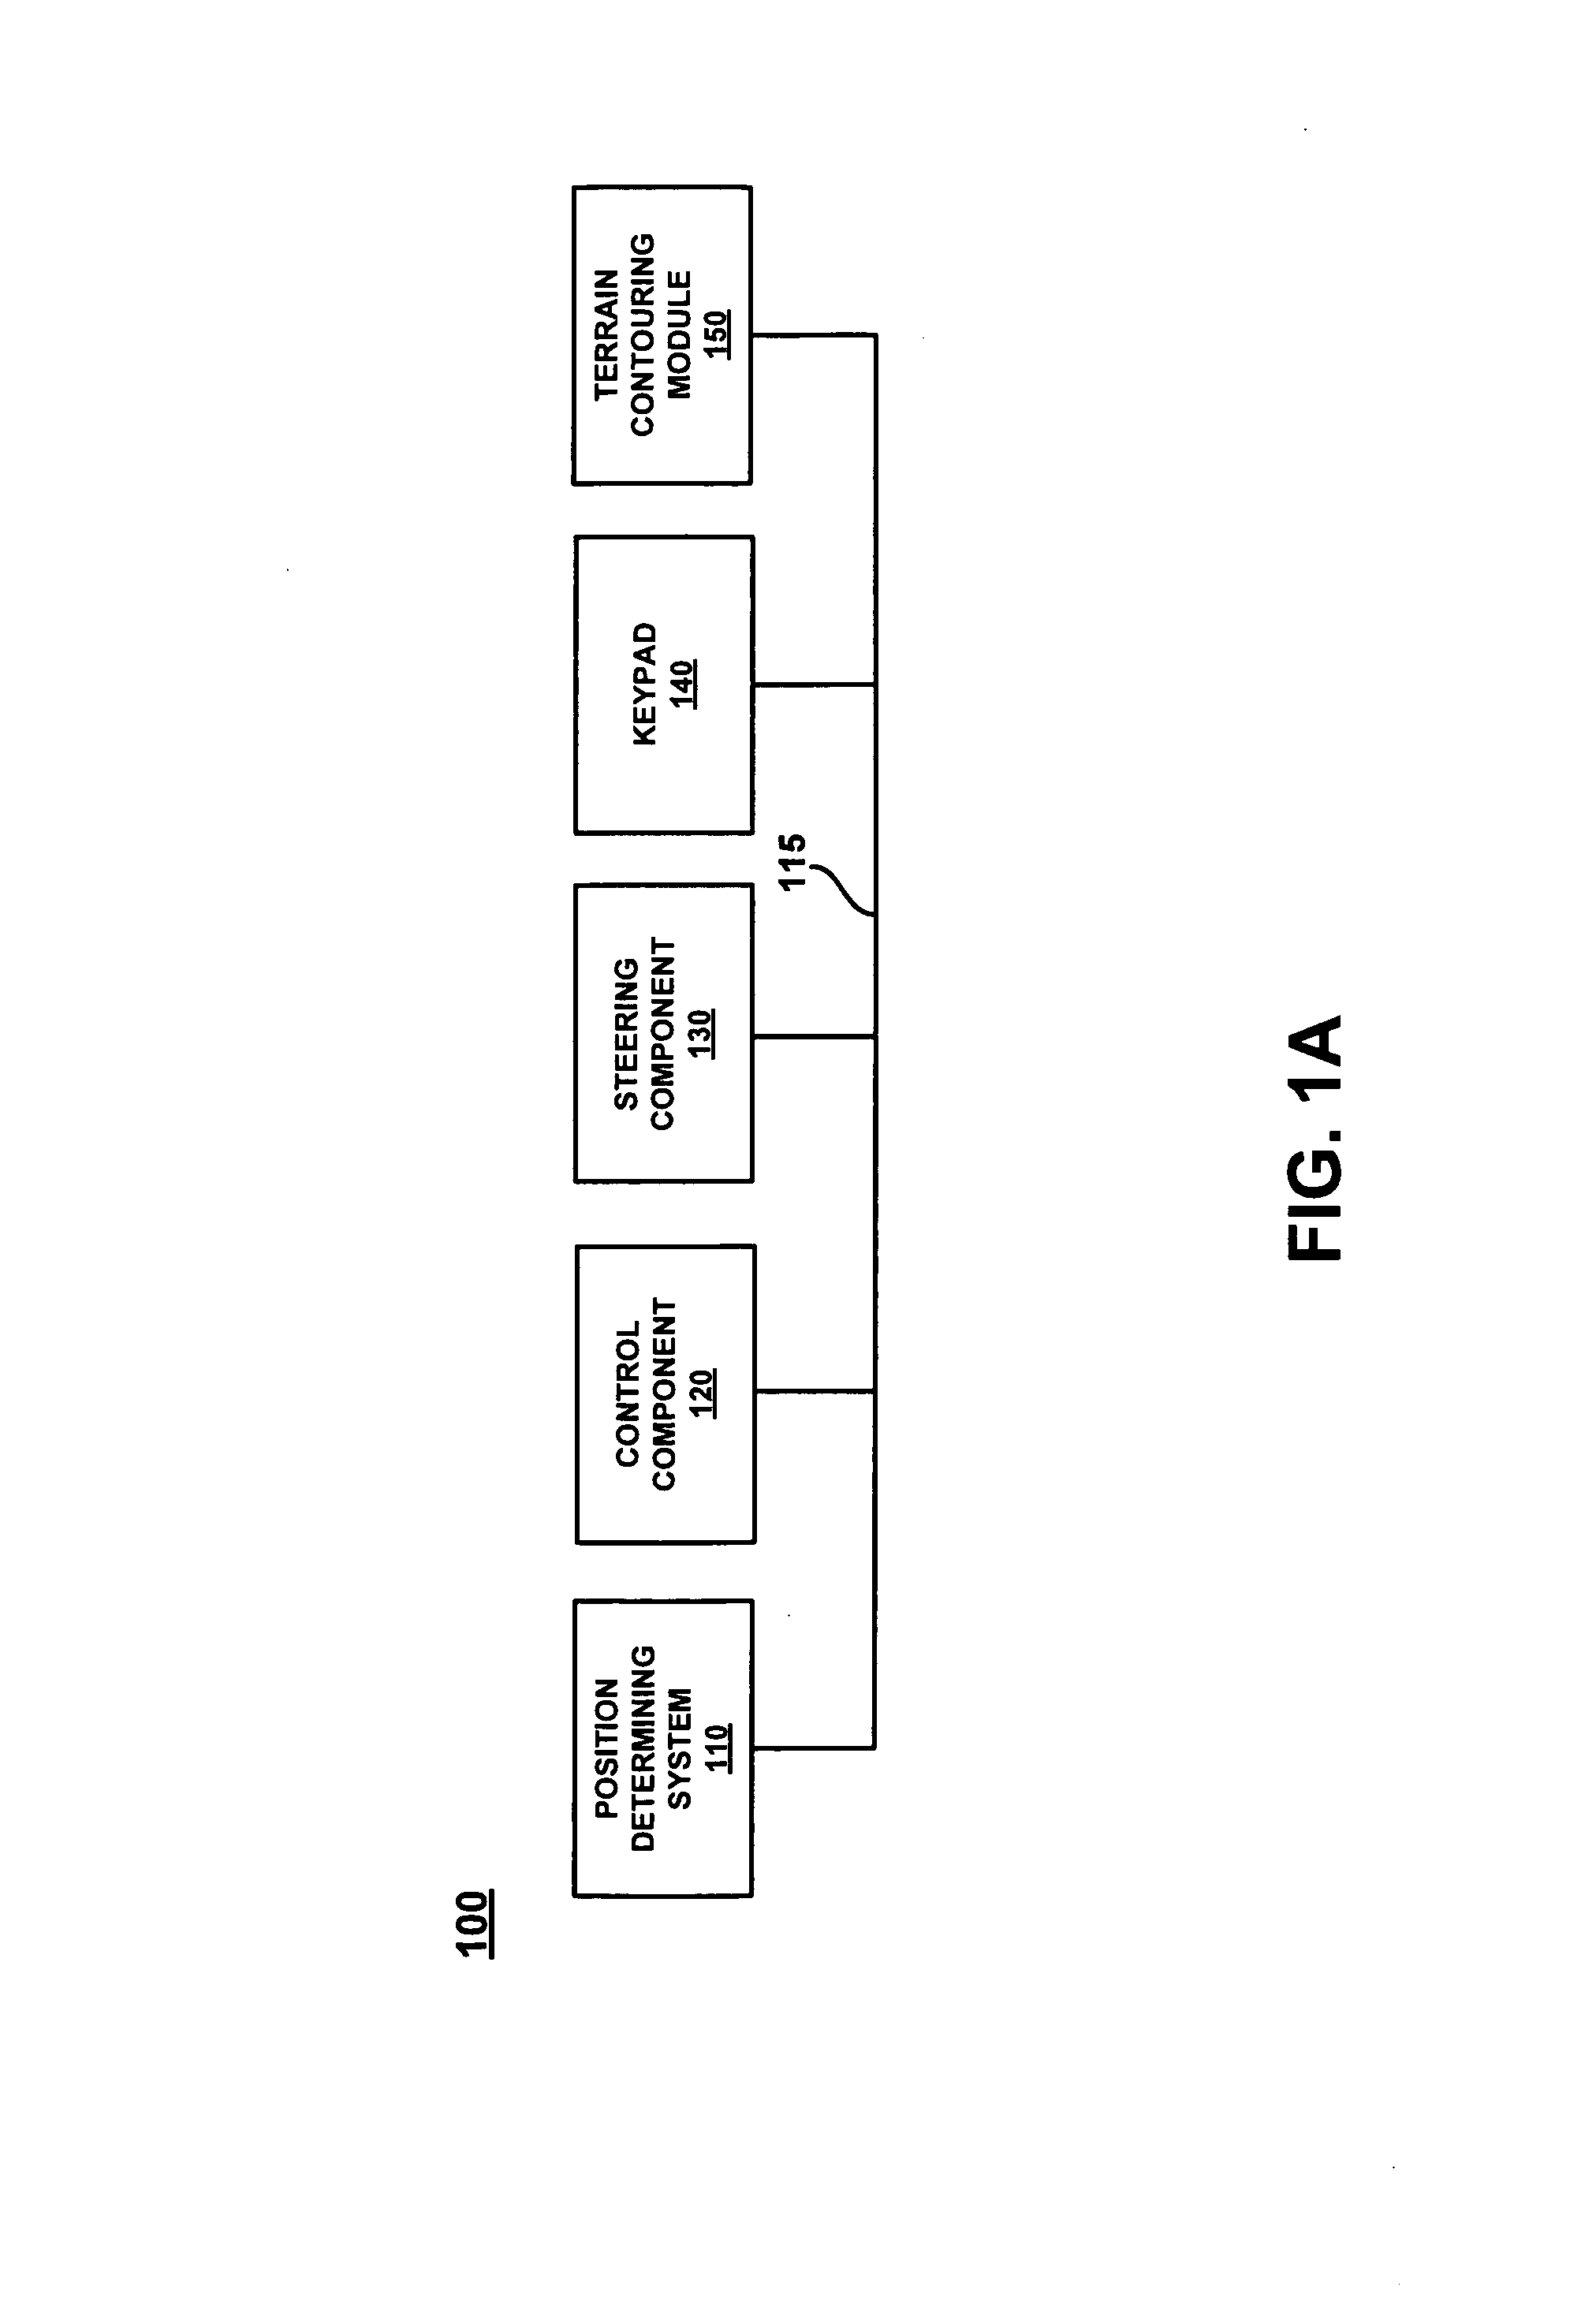 Method and system for controlling a mobile machine